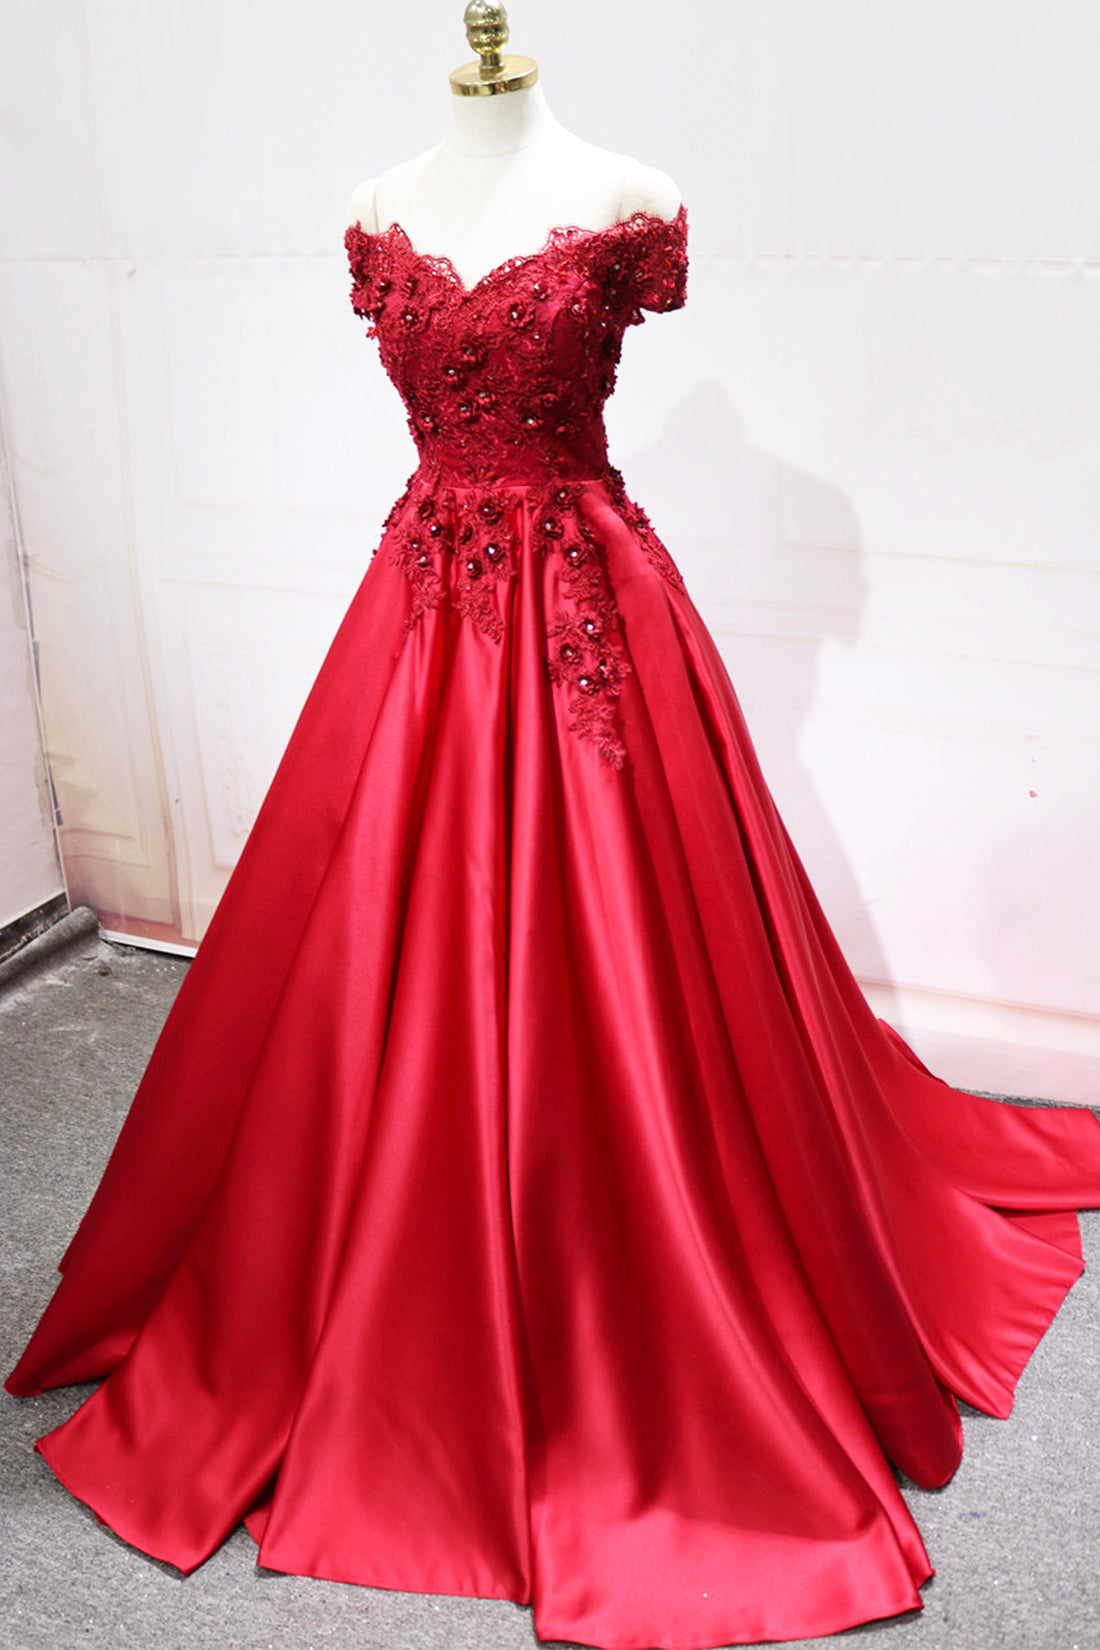 Red Satin Lace Long Prom Dress Outfits For Girls, Off Shoulder Evening Party Dress